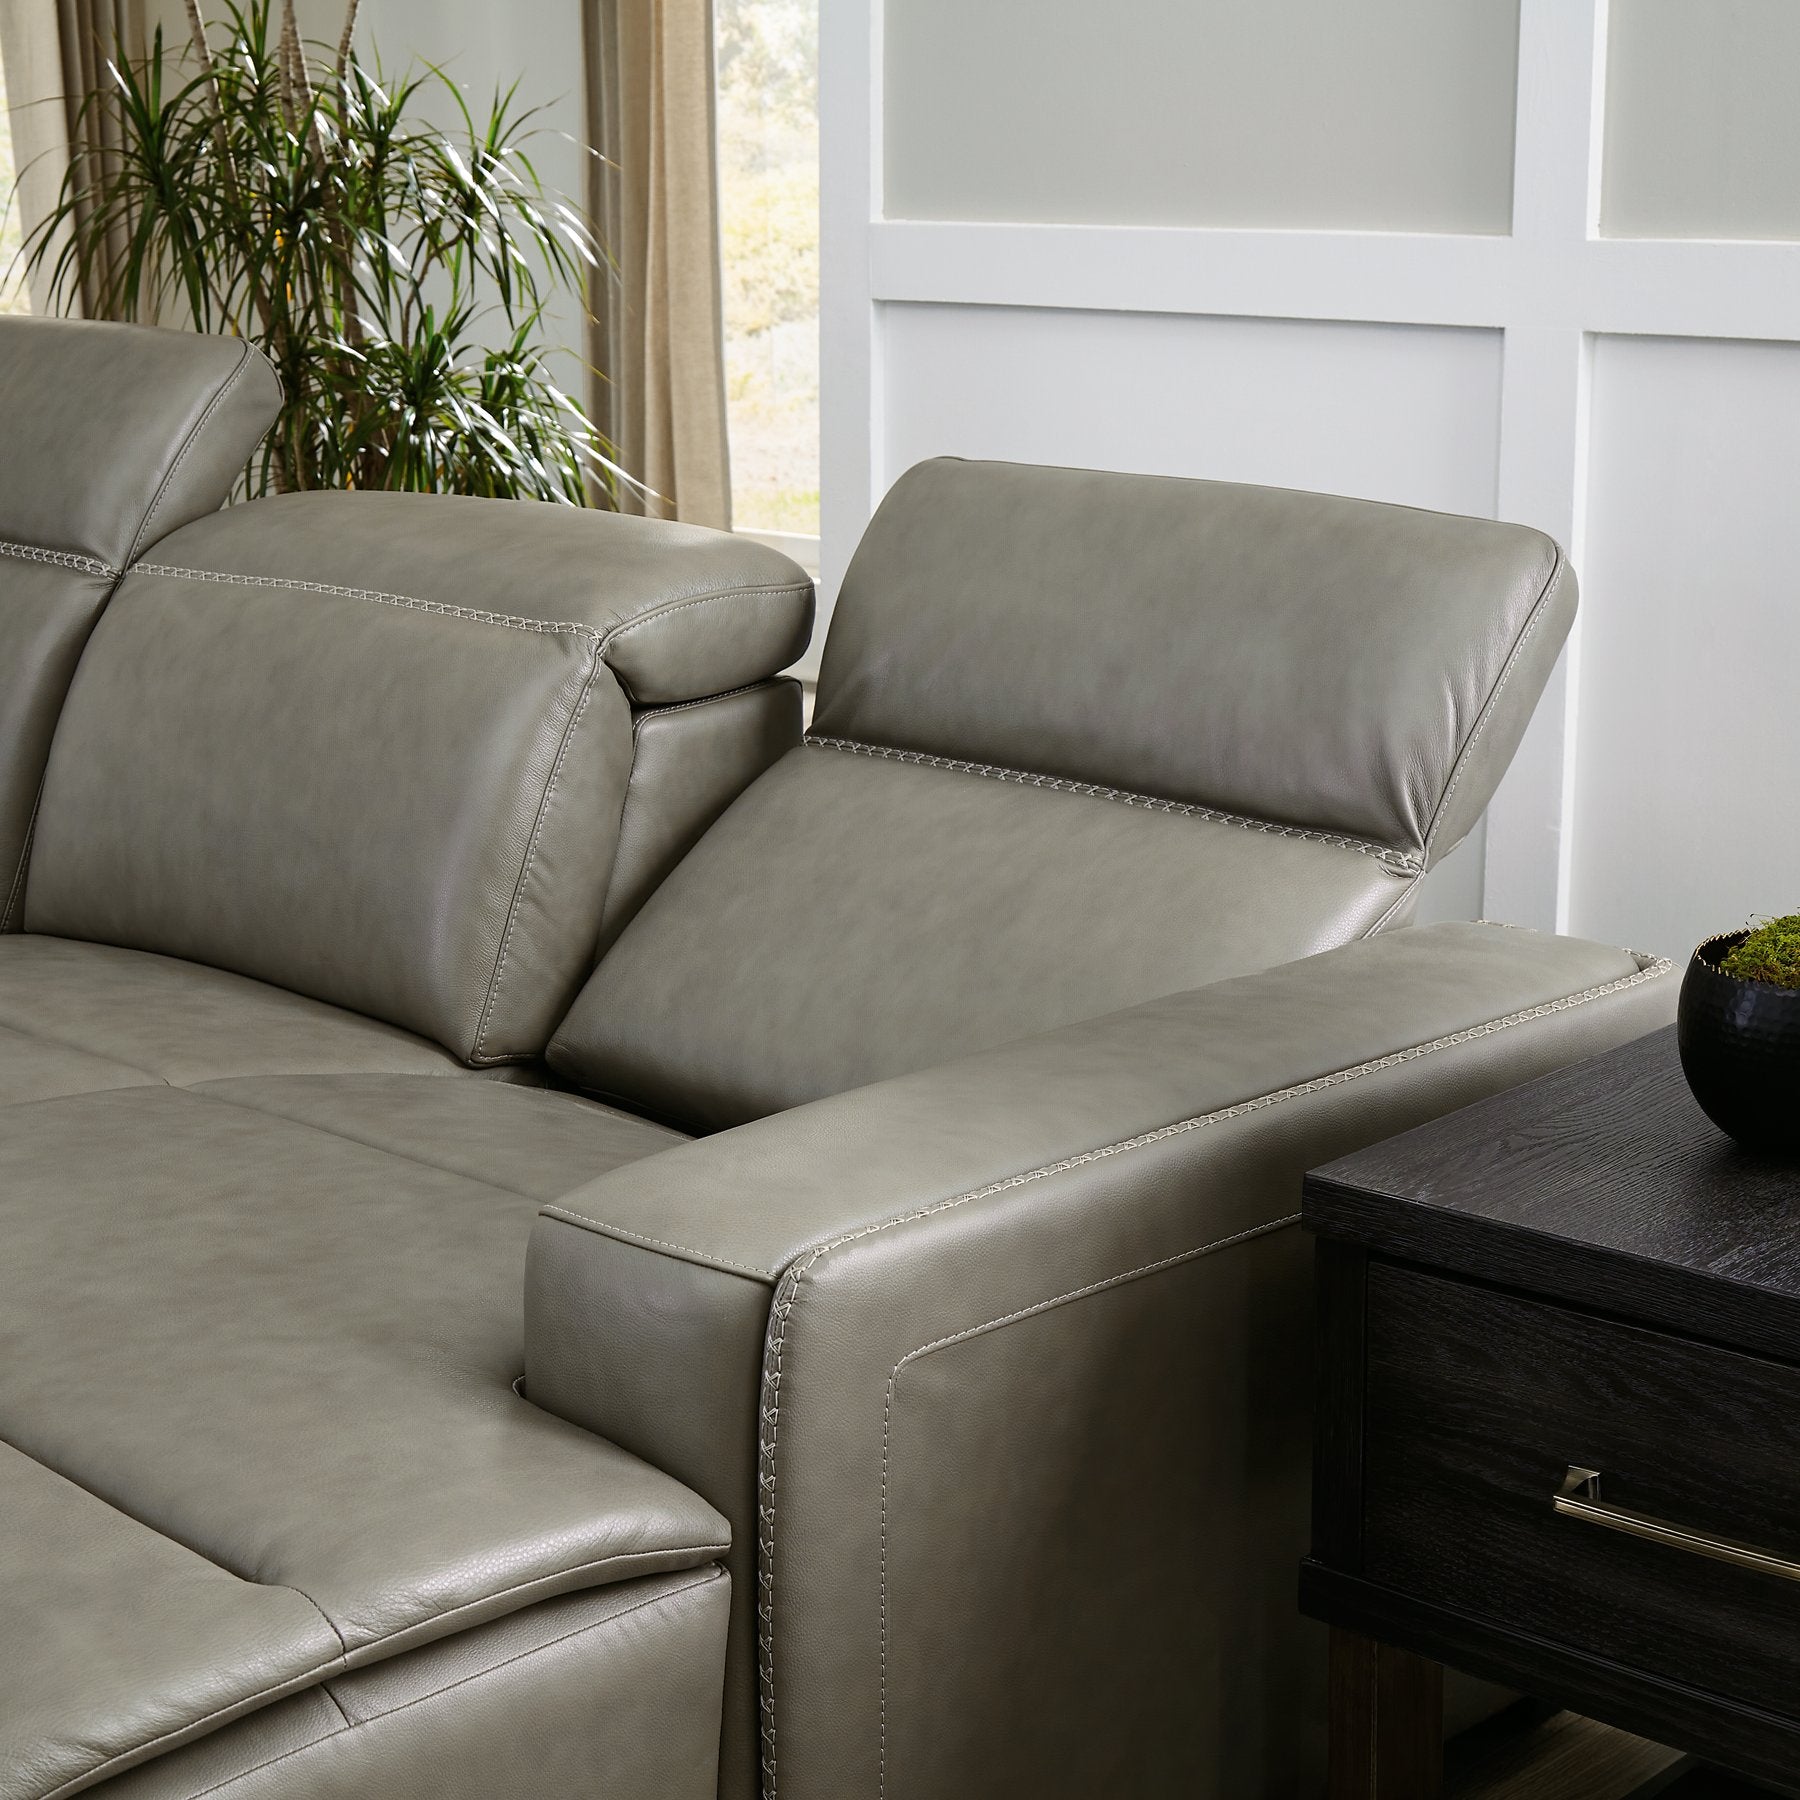 Correze Power Reclining Sectional with Chaise - Half Price Furniture